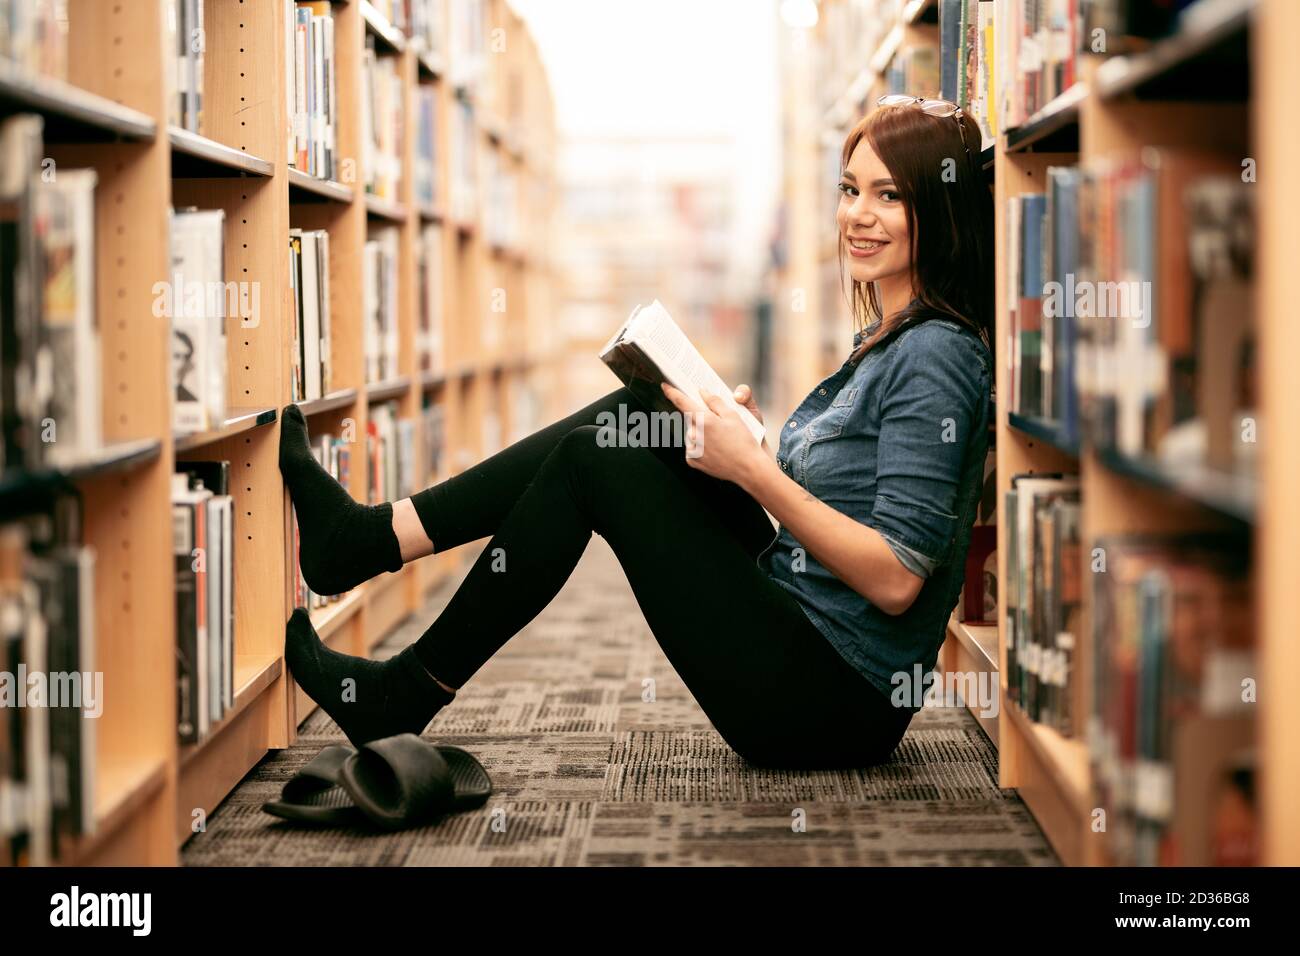 A solitary young woman reading books at her local library with view of book shelves and bookcases. Stock Photo